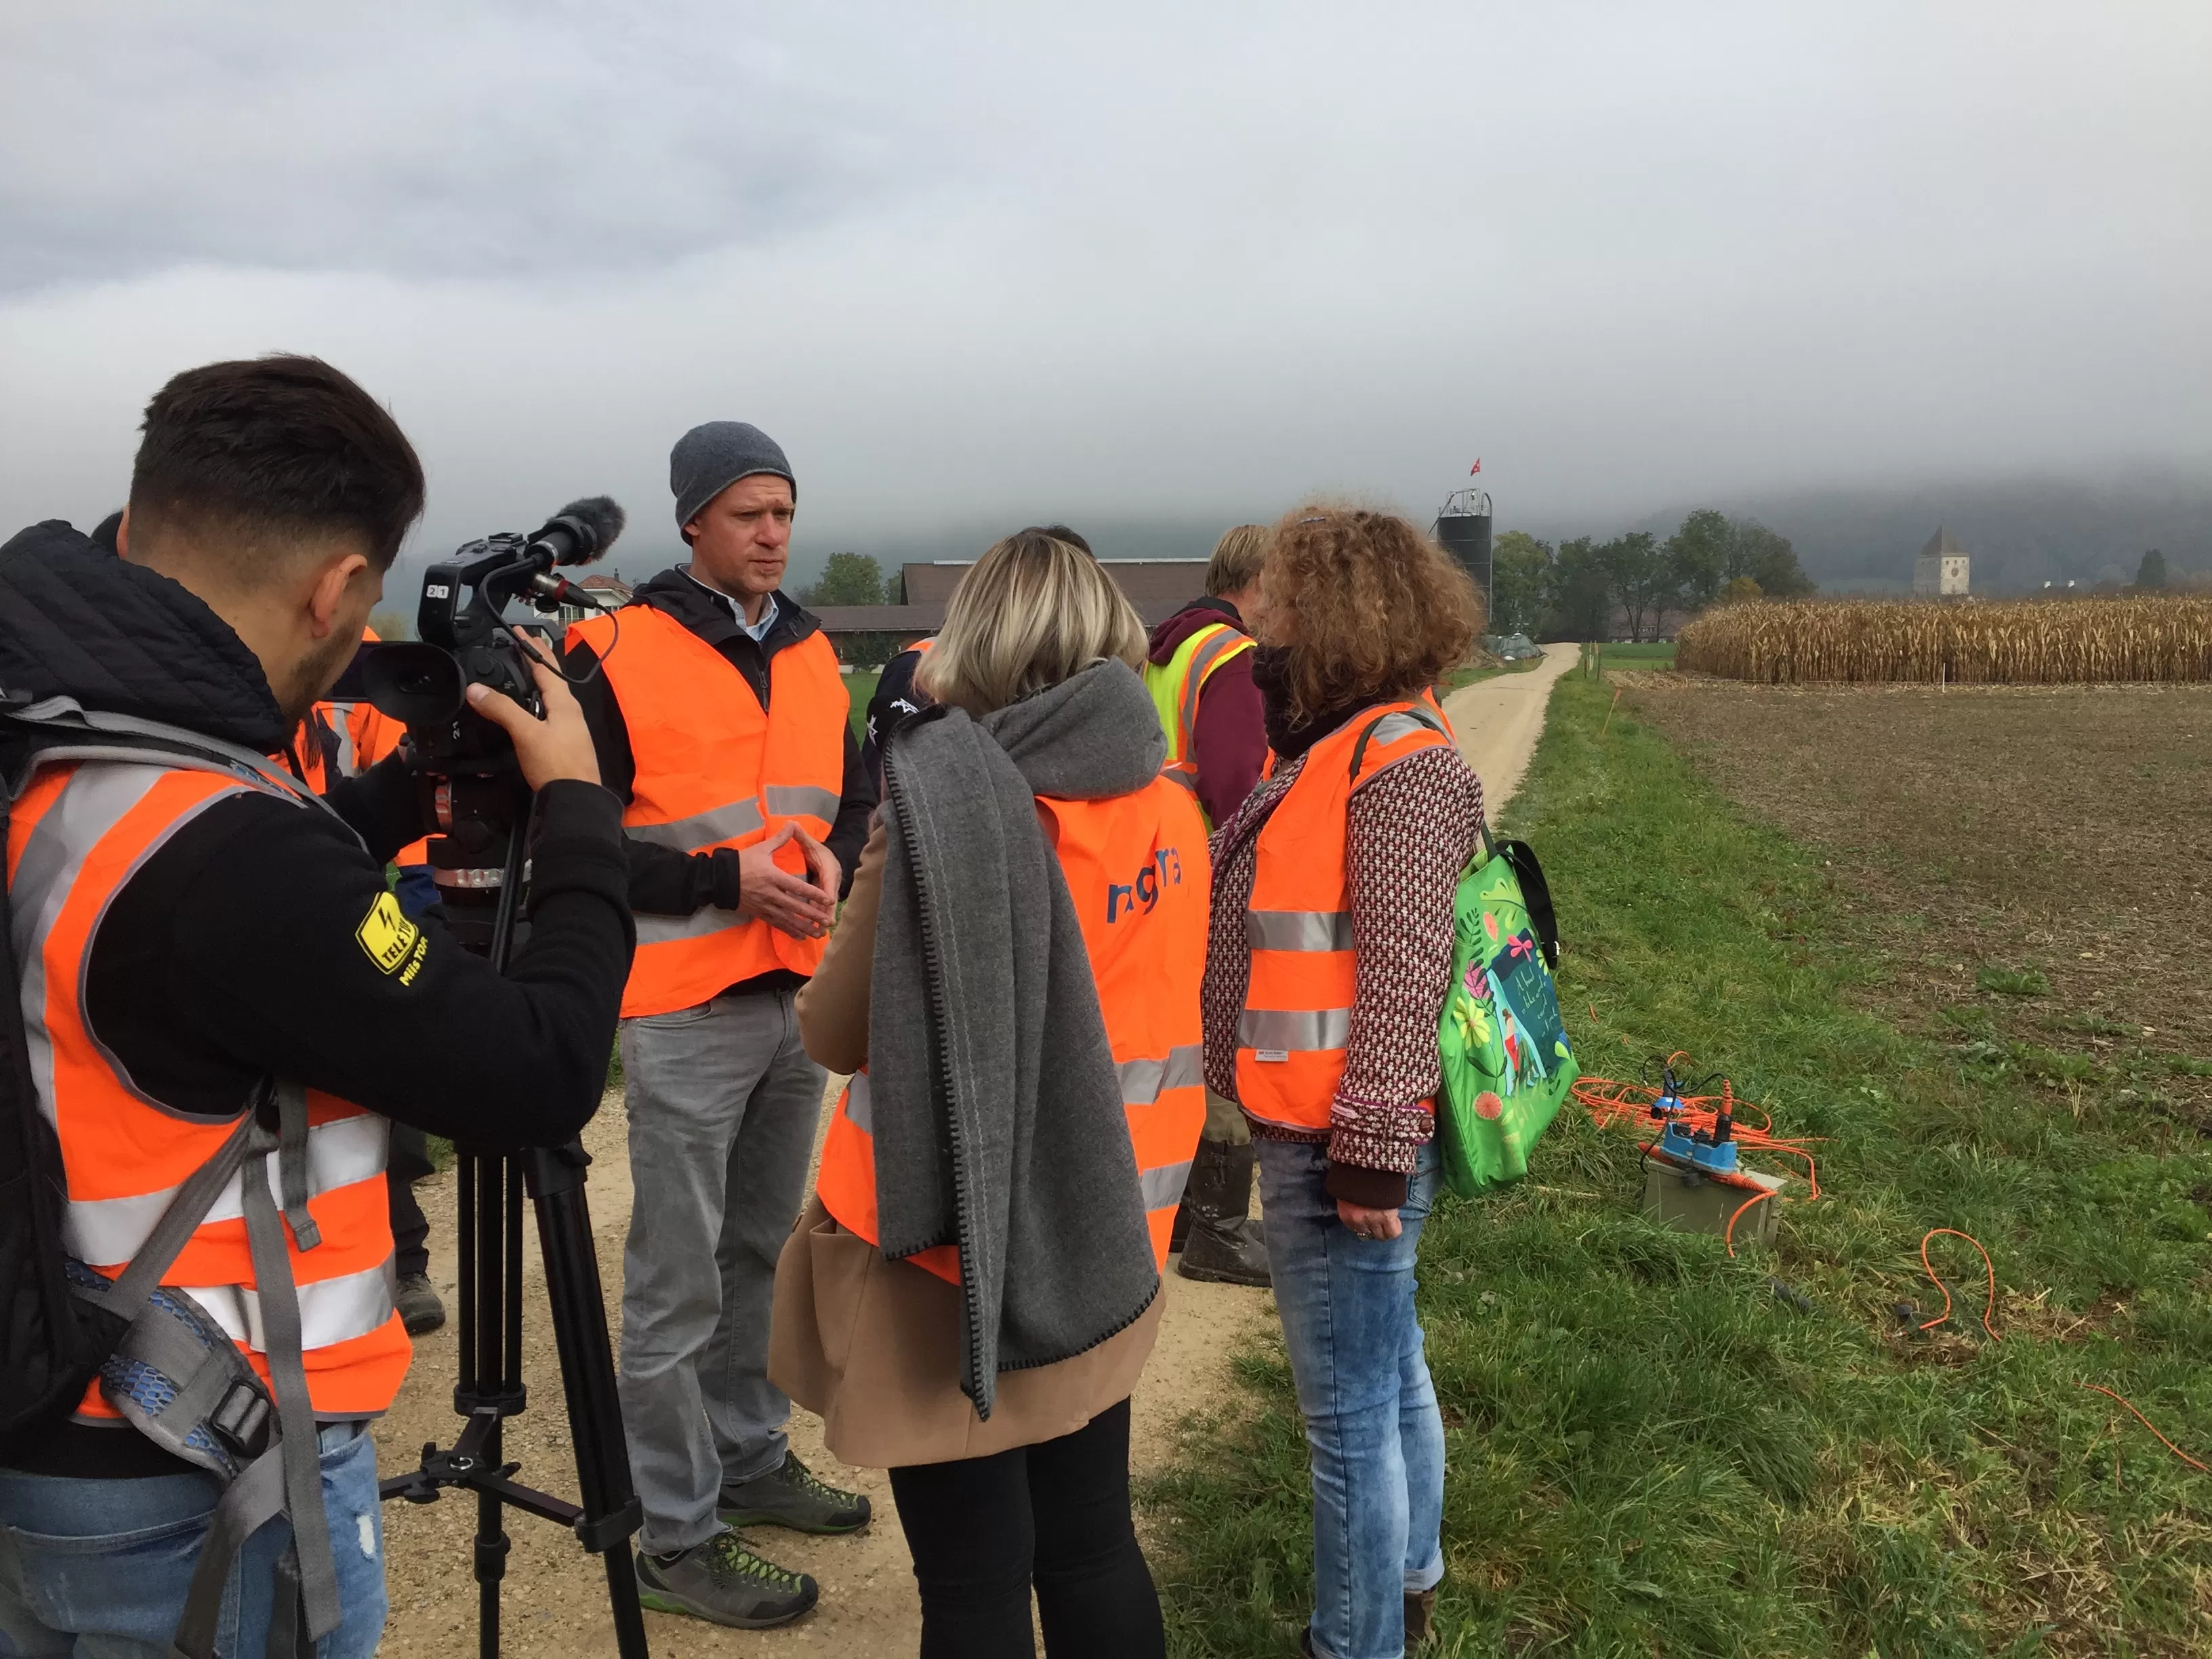 „The aim is to obtain a comprehensive image of the rock layers beneath the surface”, explained Marian Hertrich, project manager of the 3D seismic survey.